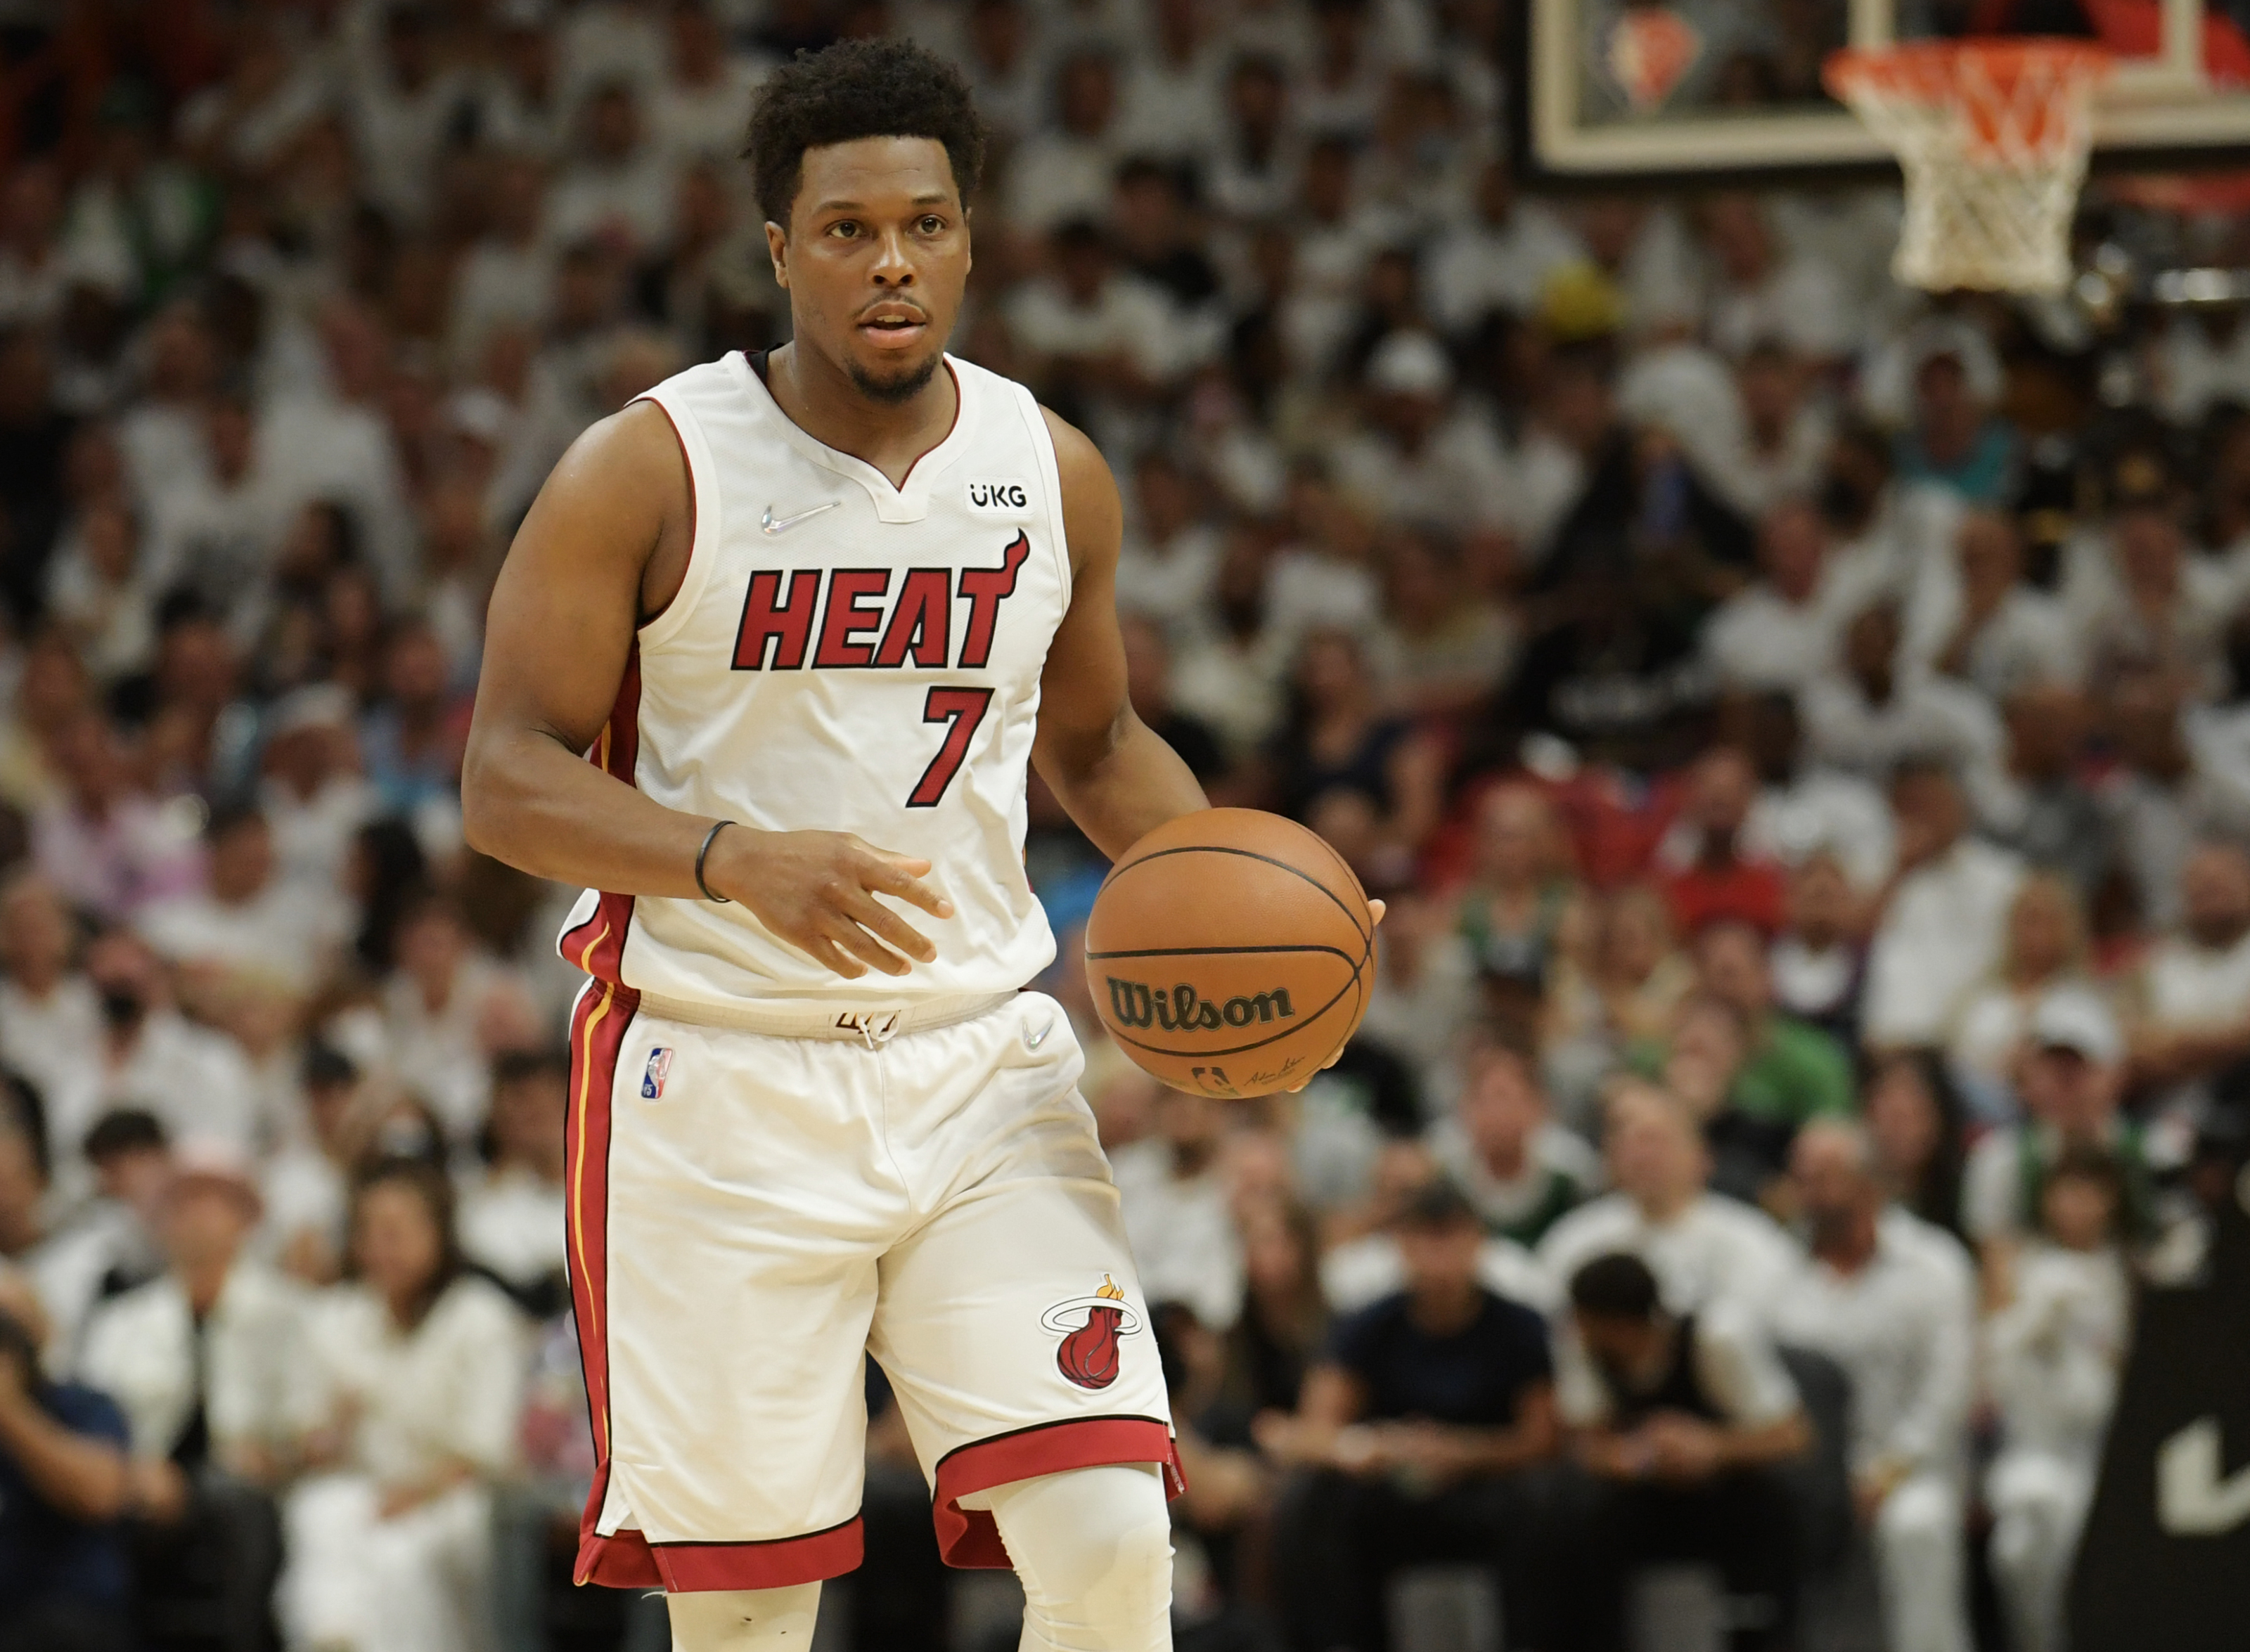 NBA News: How Kyle Lowry Is Thriving With Miami Heat To Begin Season